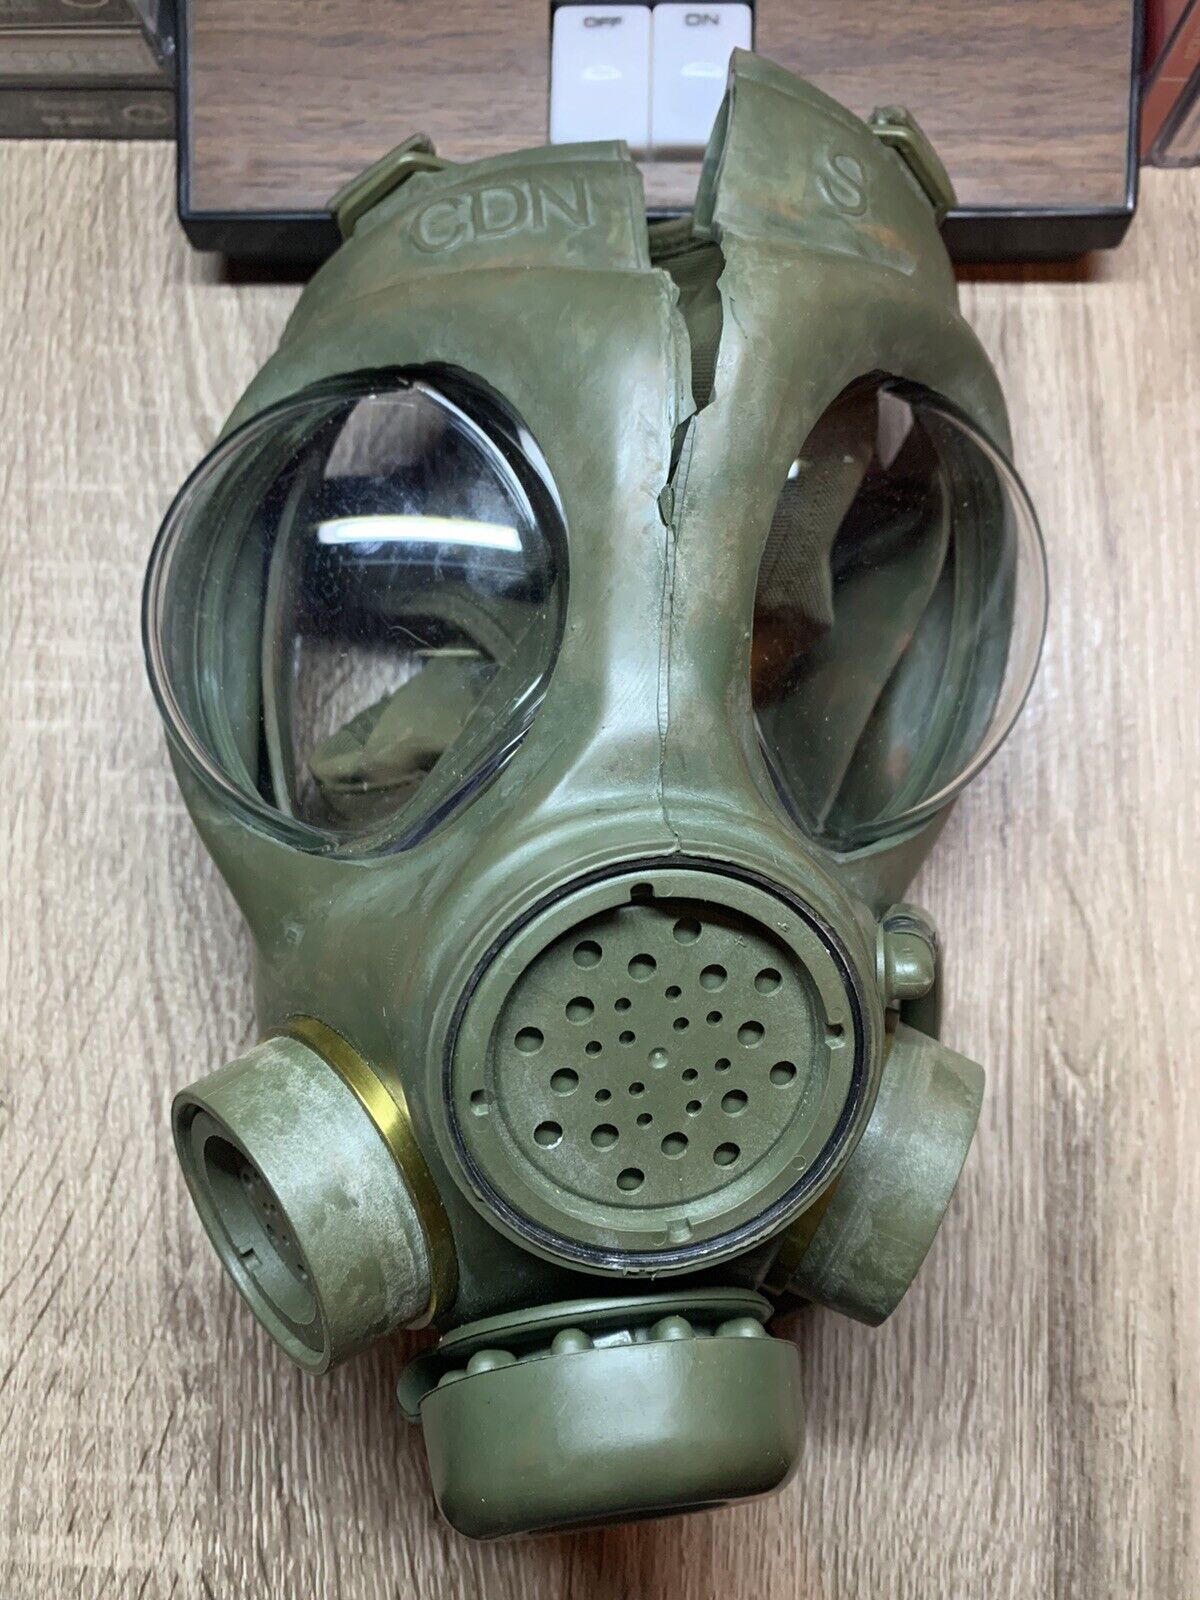 C4 Gas Mask Parts Unit Canadian Army